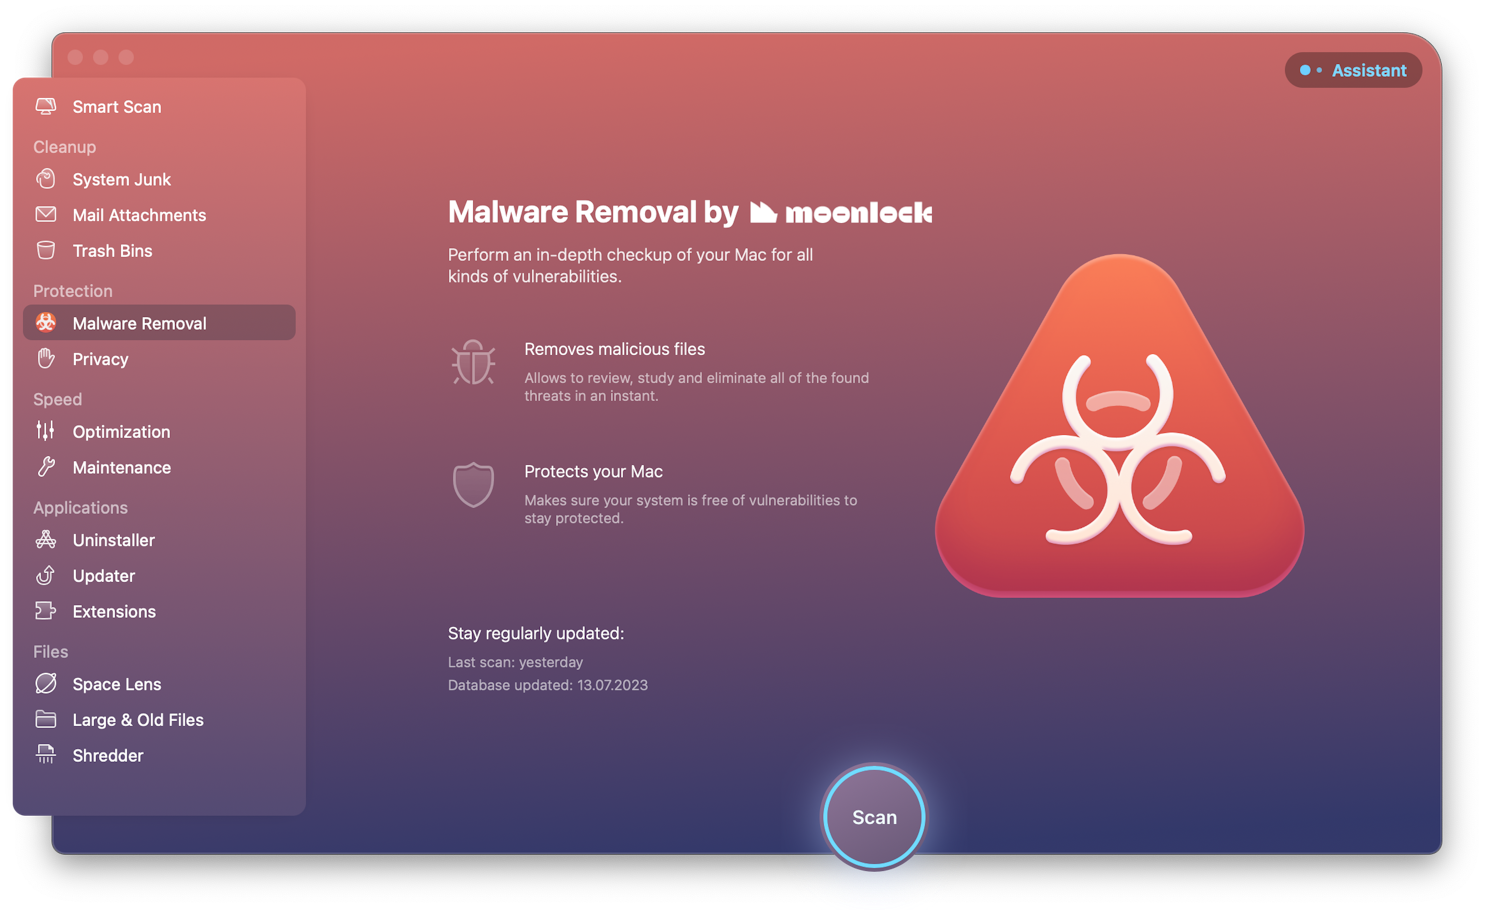 Malware Removal module powered by the Moonlock engine